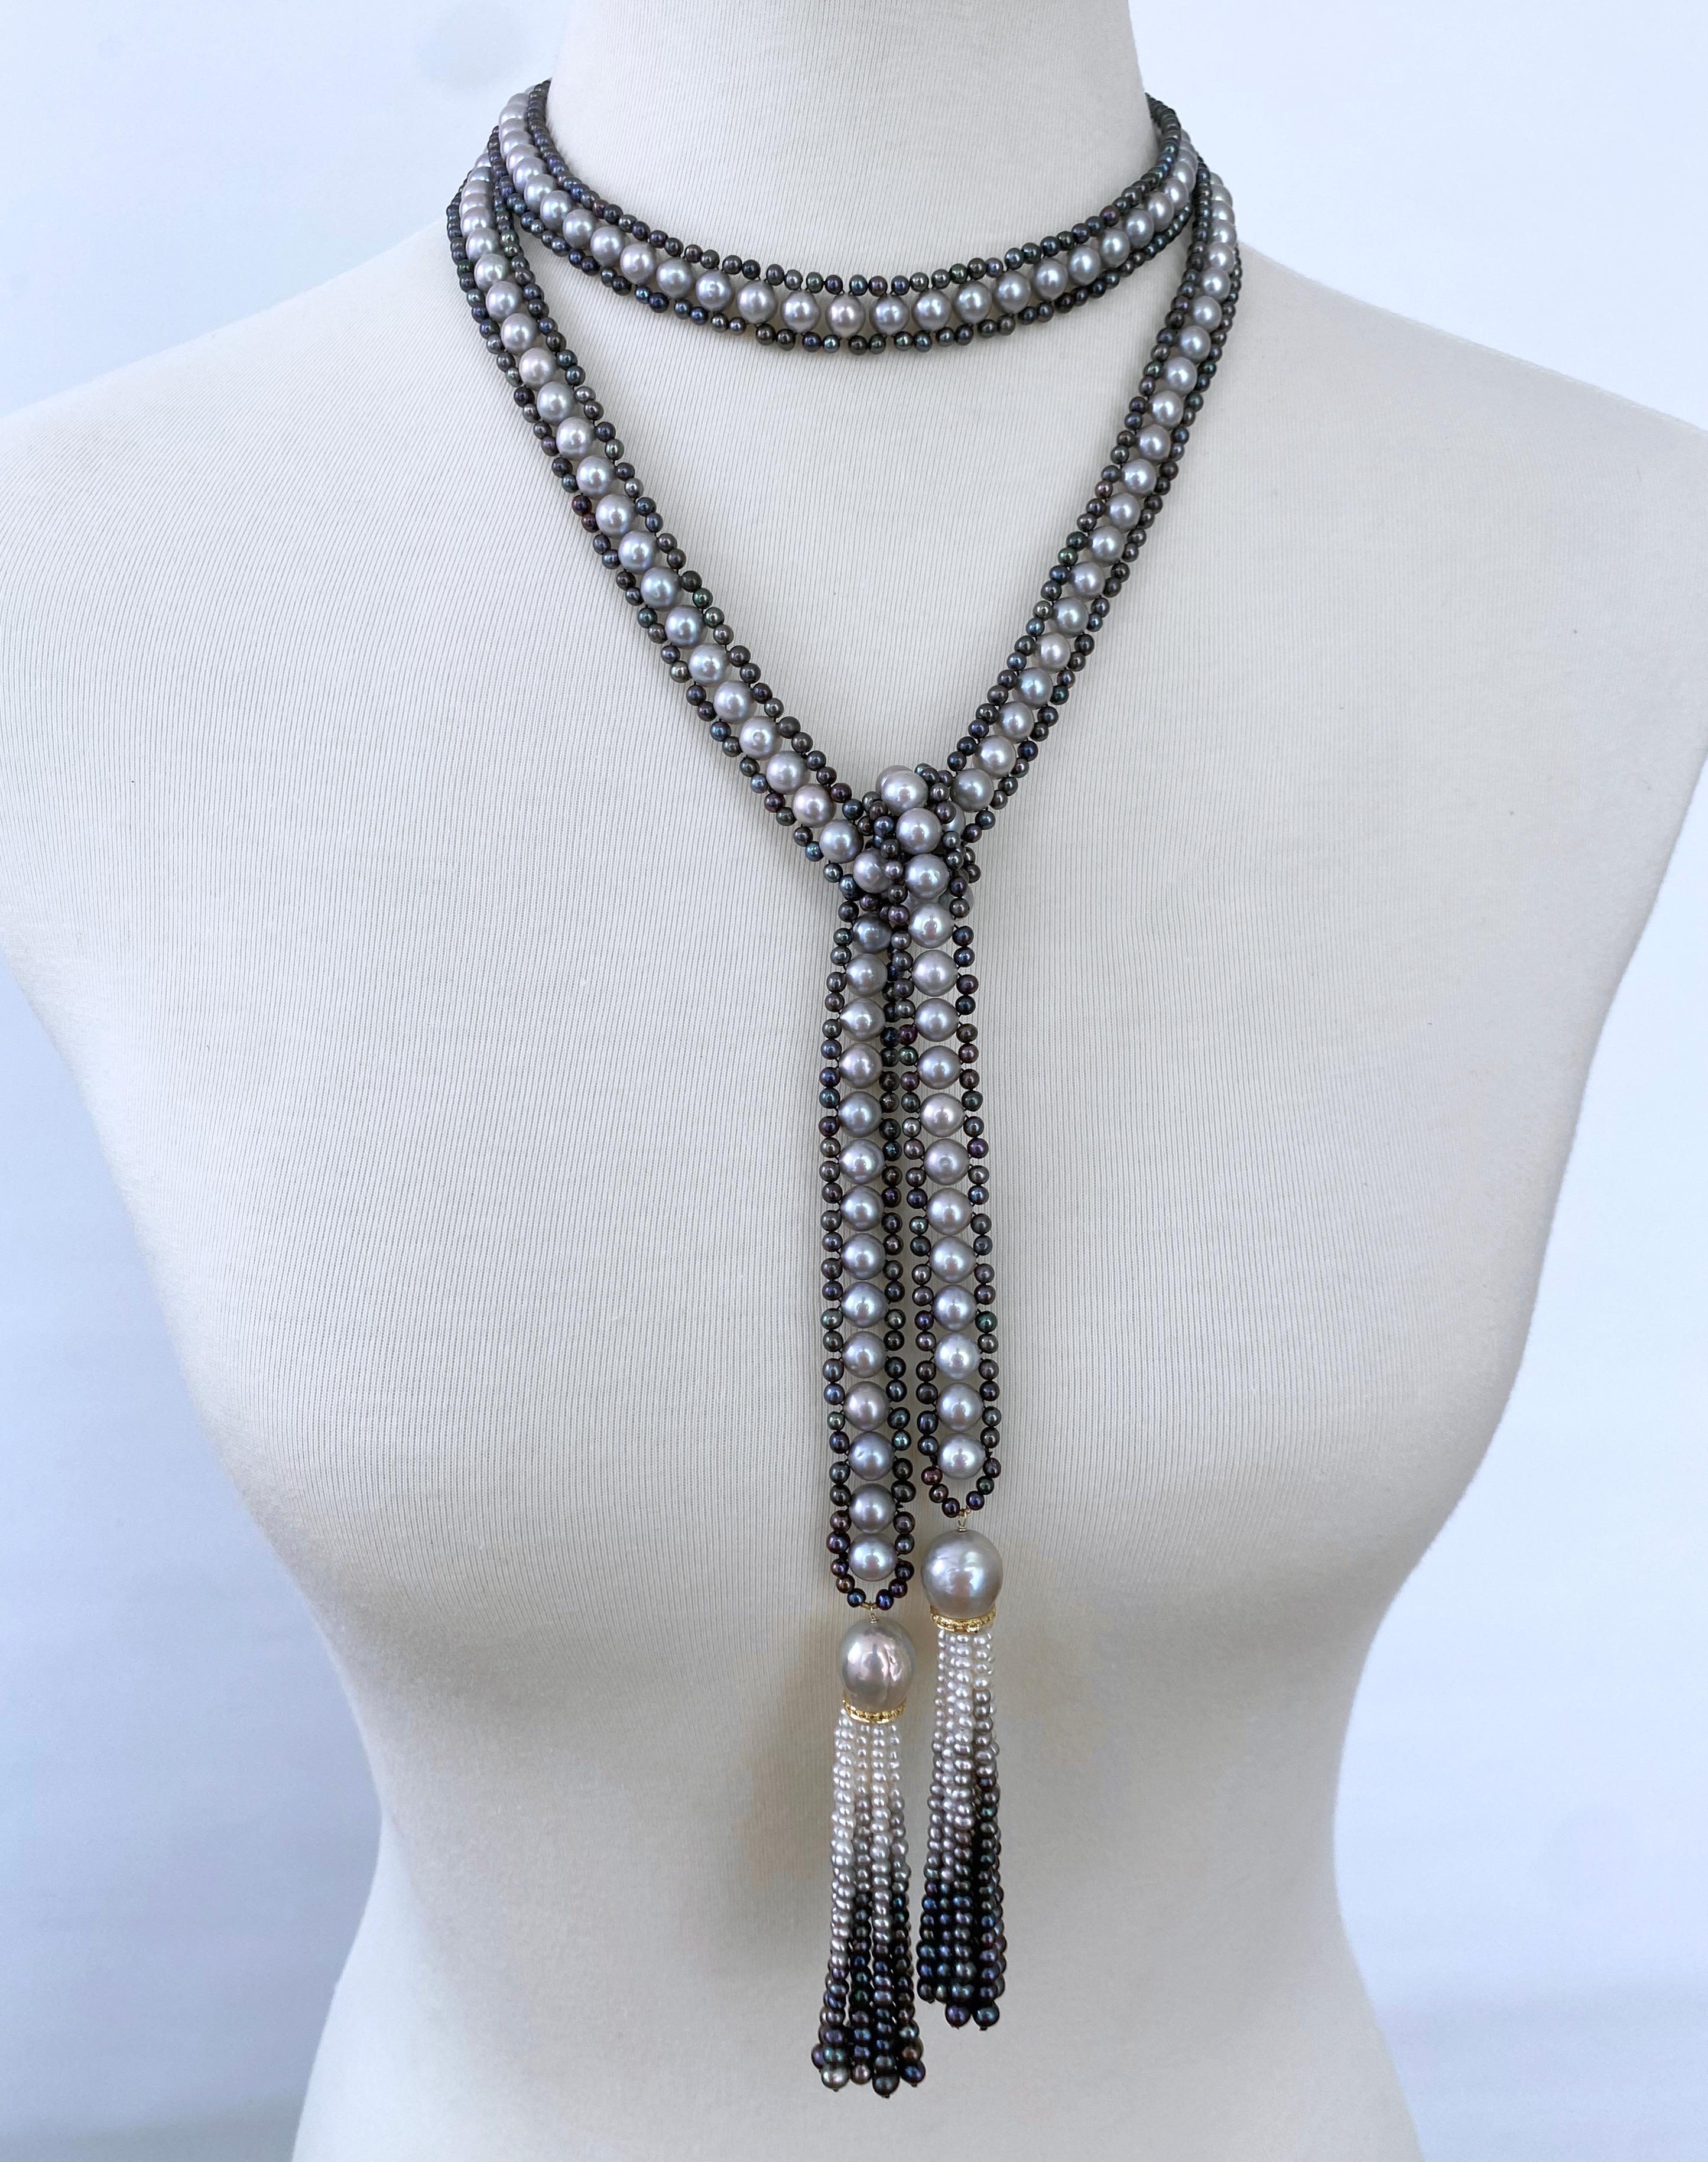 Stunning Sautoir by Marina J.

This piece is made with all natural Pearls, Gold Plated Silver & Diamonds. Measuring 50 inches sans Tassels, this open Sautoir is made with Grey and Black Pearls woven together into a tight column. The Black Pearls